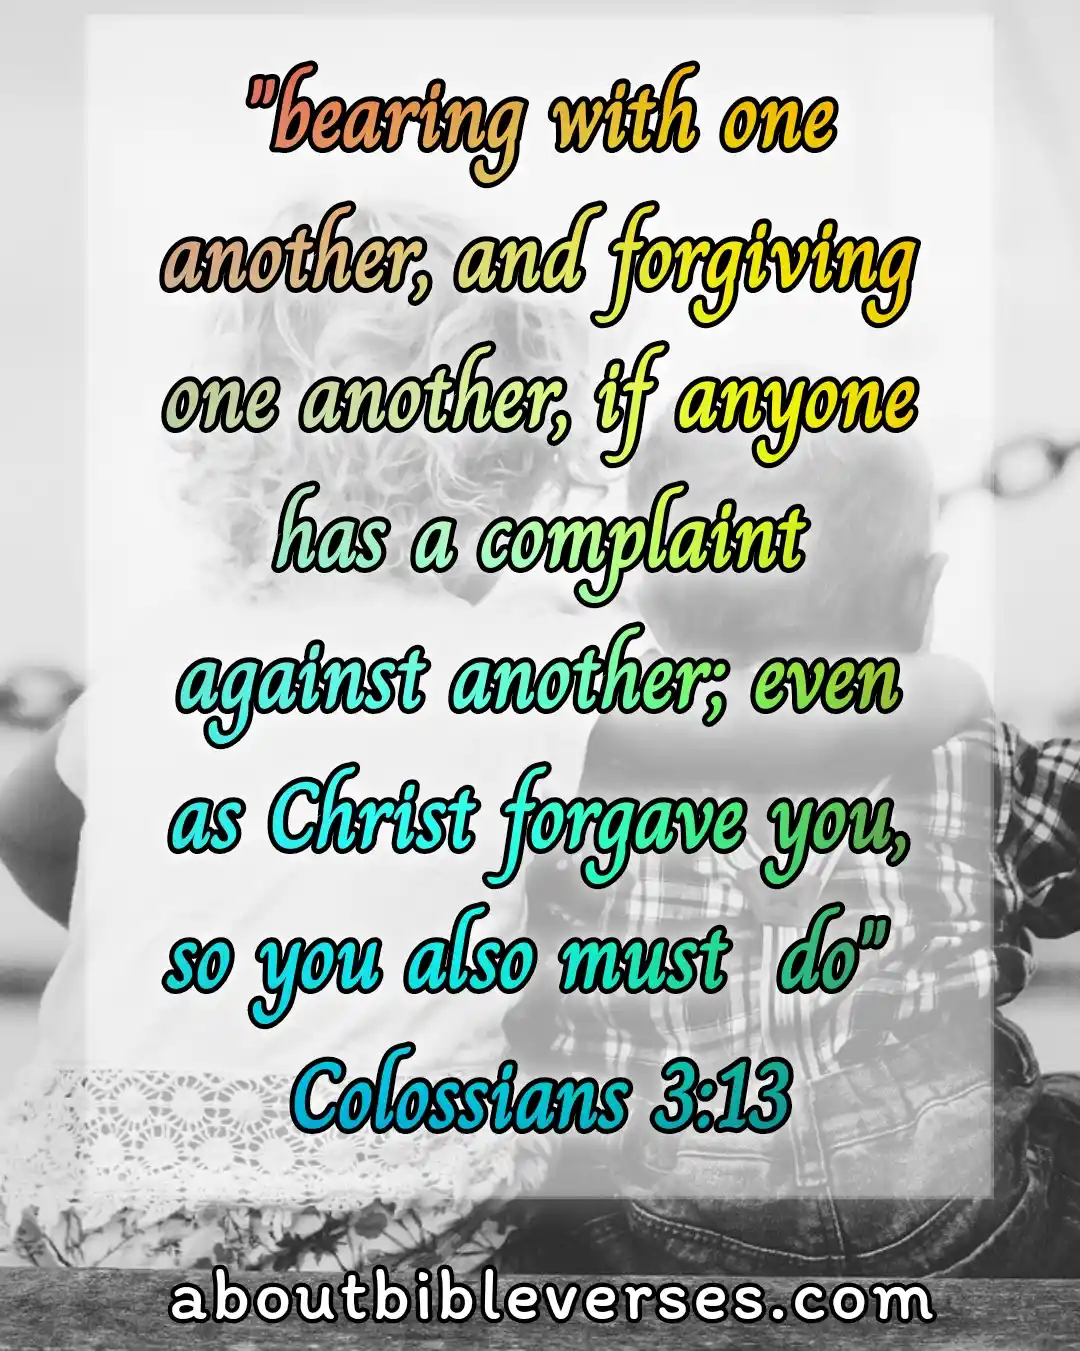 today bible verse (Colossians 3:13)